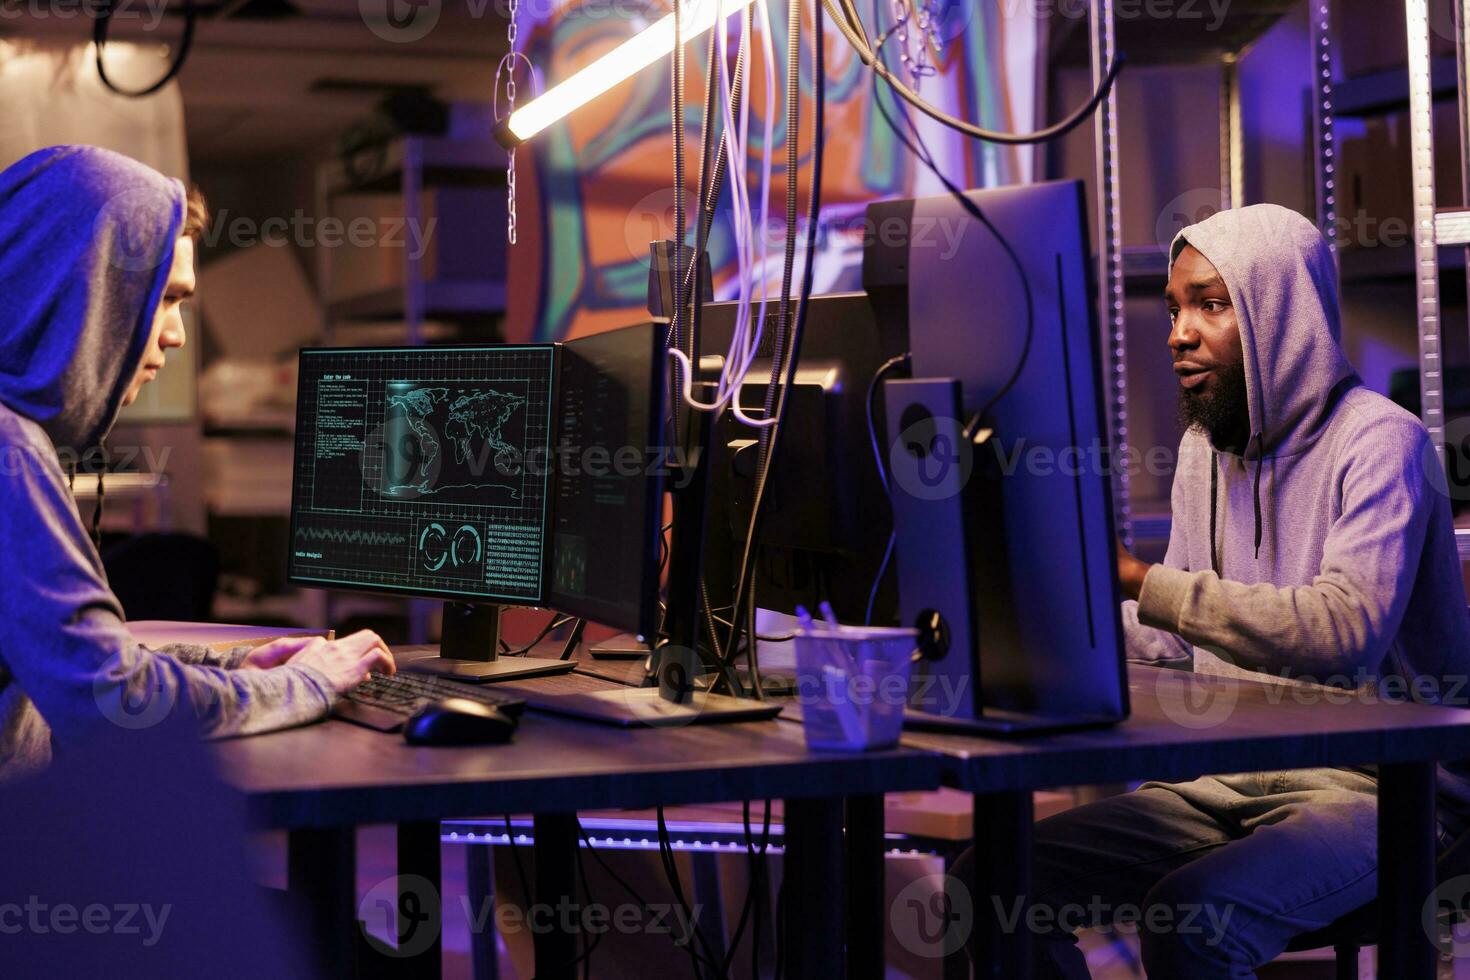 Two hackers planning phishing cyberattack while coding ransomware on computers. Asian and african american men in hoods developing malicious software in dark abandoned warehouse photo